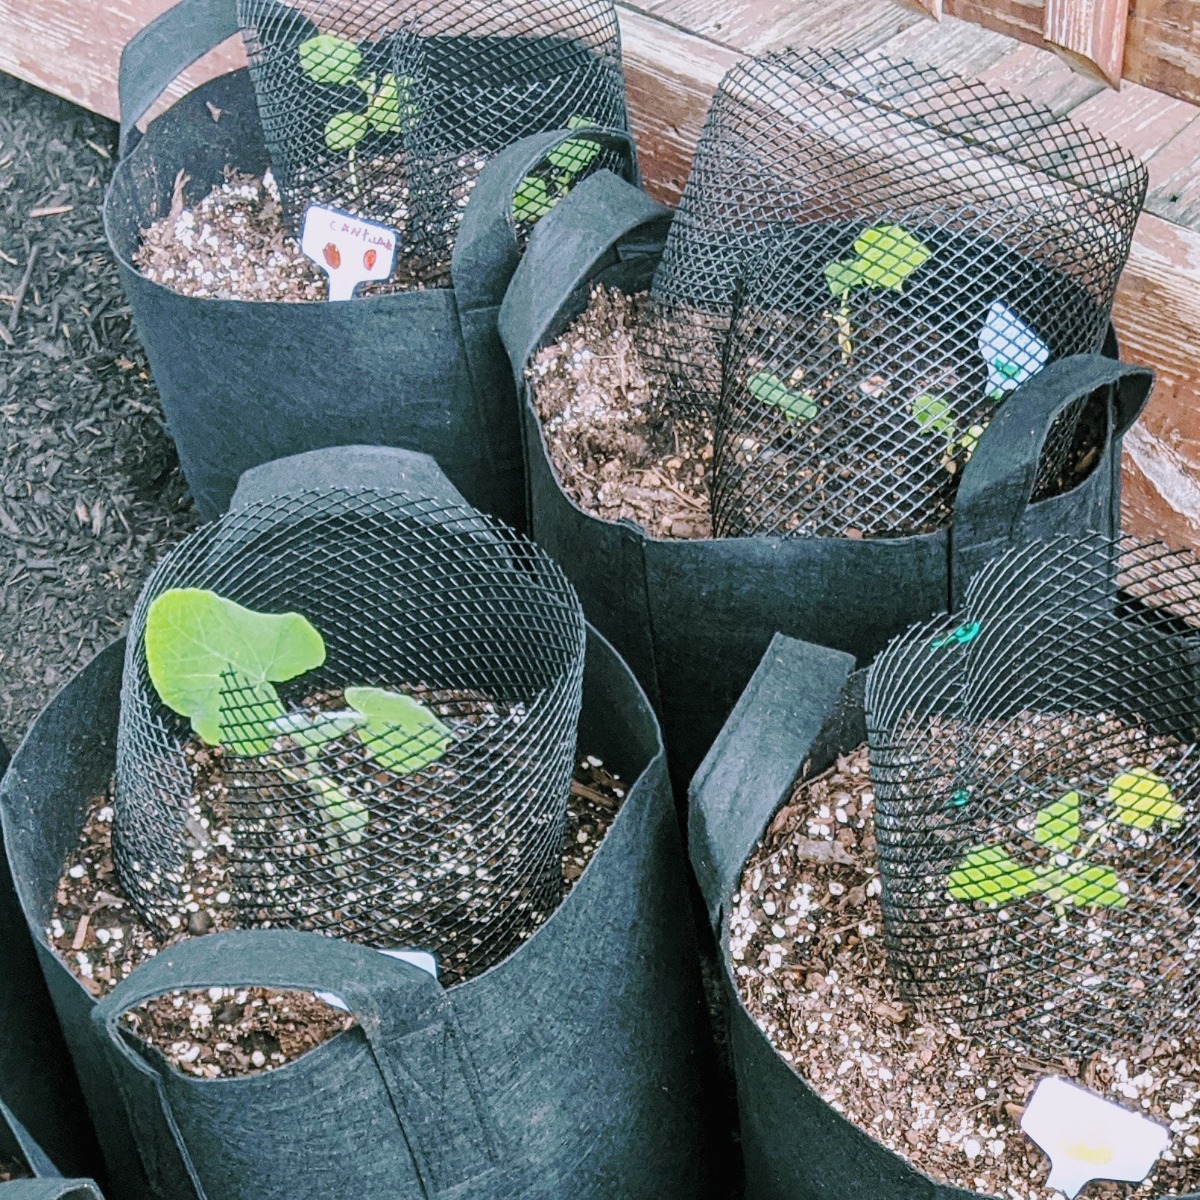 Cantaloupe Seedlings and other baby plants in grow bags in our 2020 garden